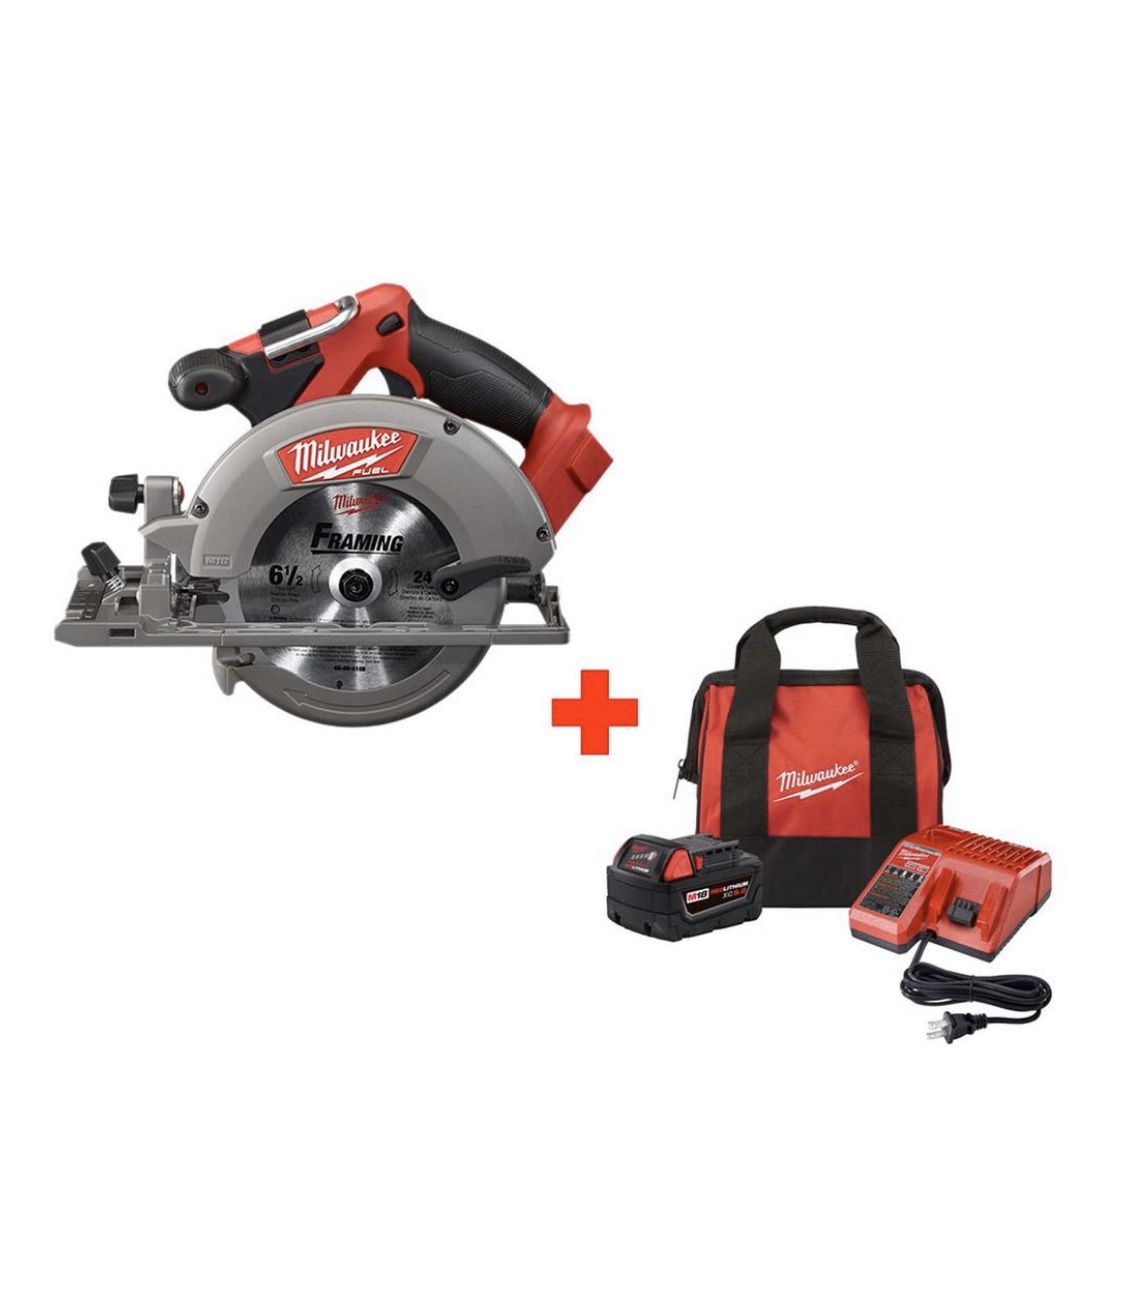 Milwaukee M18 FUEL 18-Volt Lithium-Ion Brushless Cordless 6-1/2 in. Circular Saw with One 5.0 Ah Battery, Charger and Bag